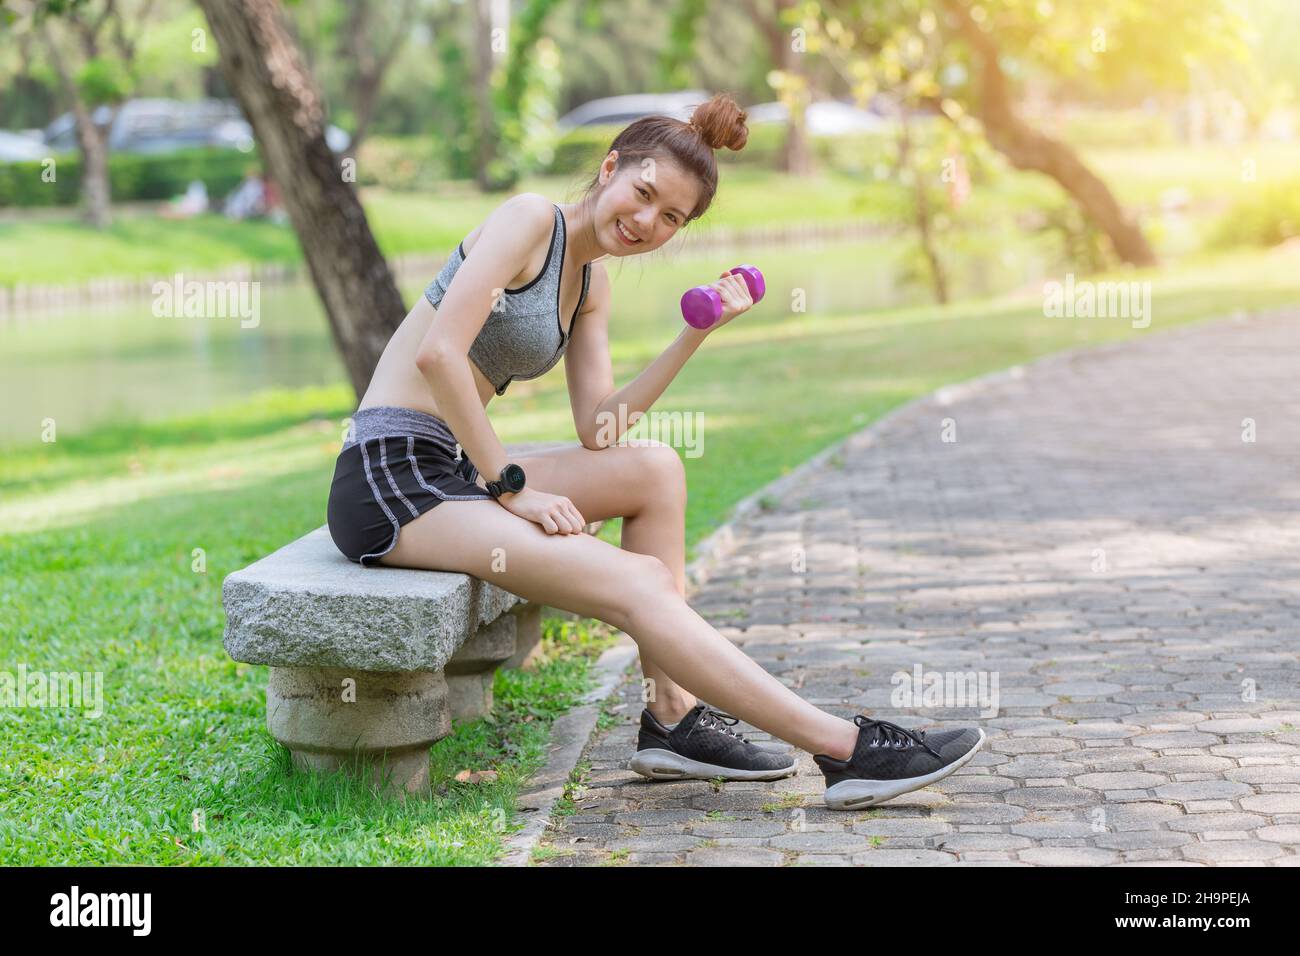 Slimming healthy women in sportswear teen cute happy enjoy fit and firm weight in the park Stock Photo